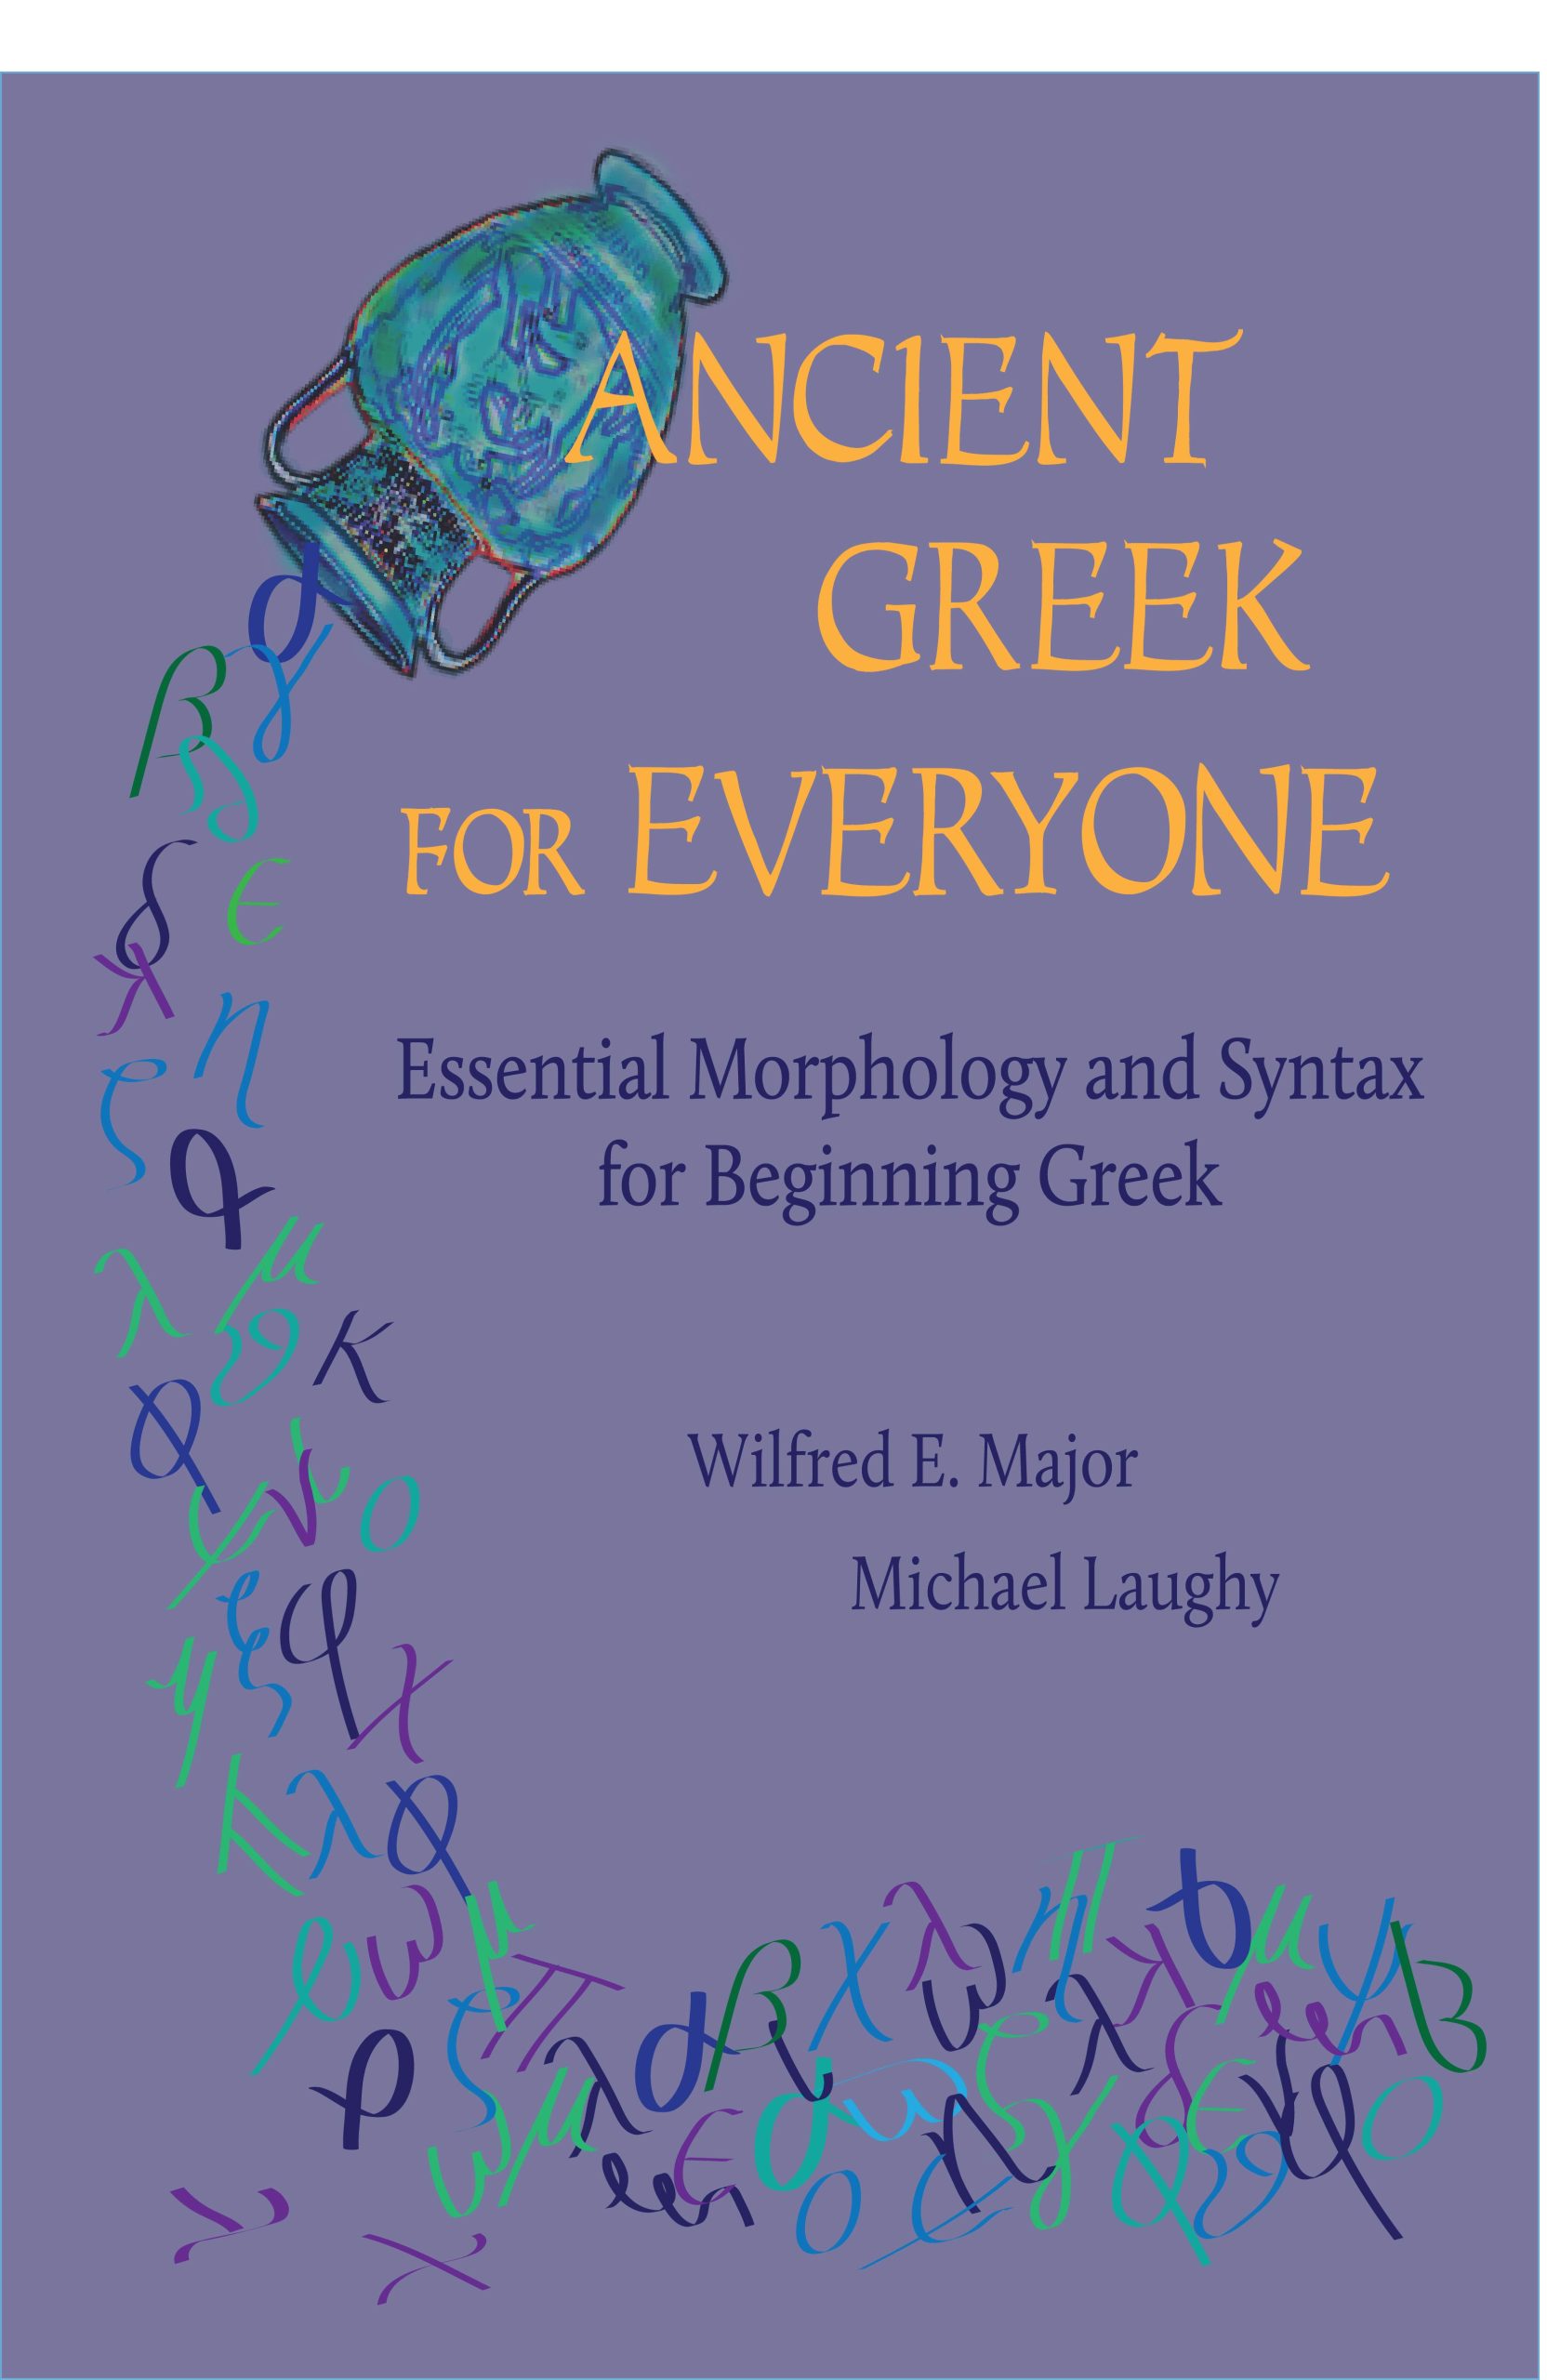 Cover image for Ancient Greek for Everyone at Duke